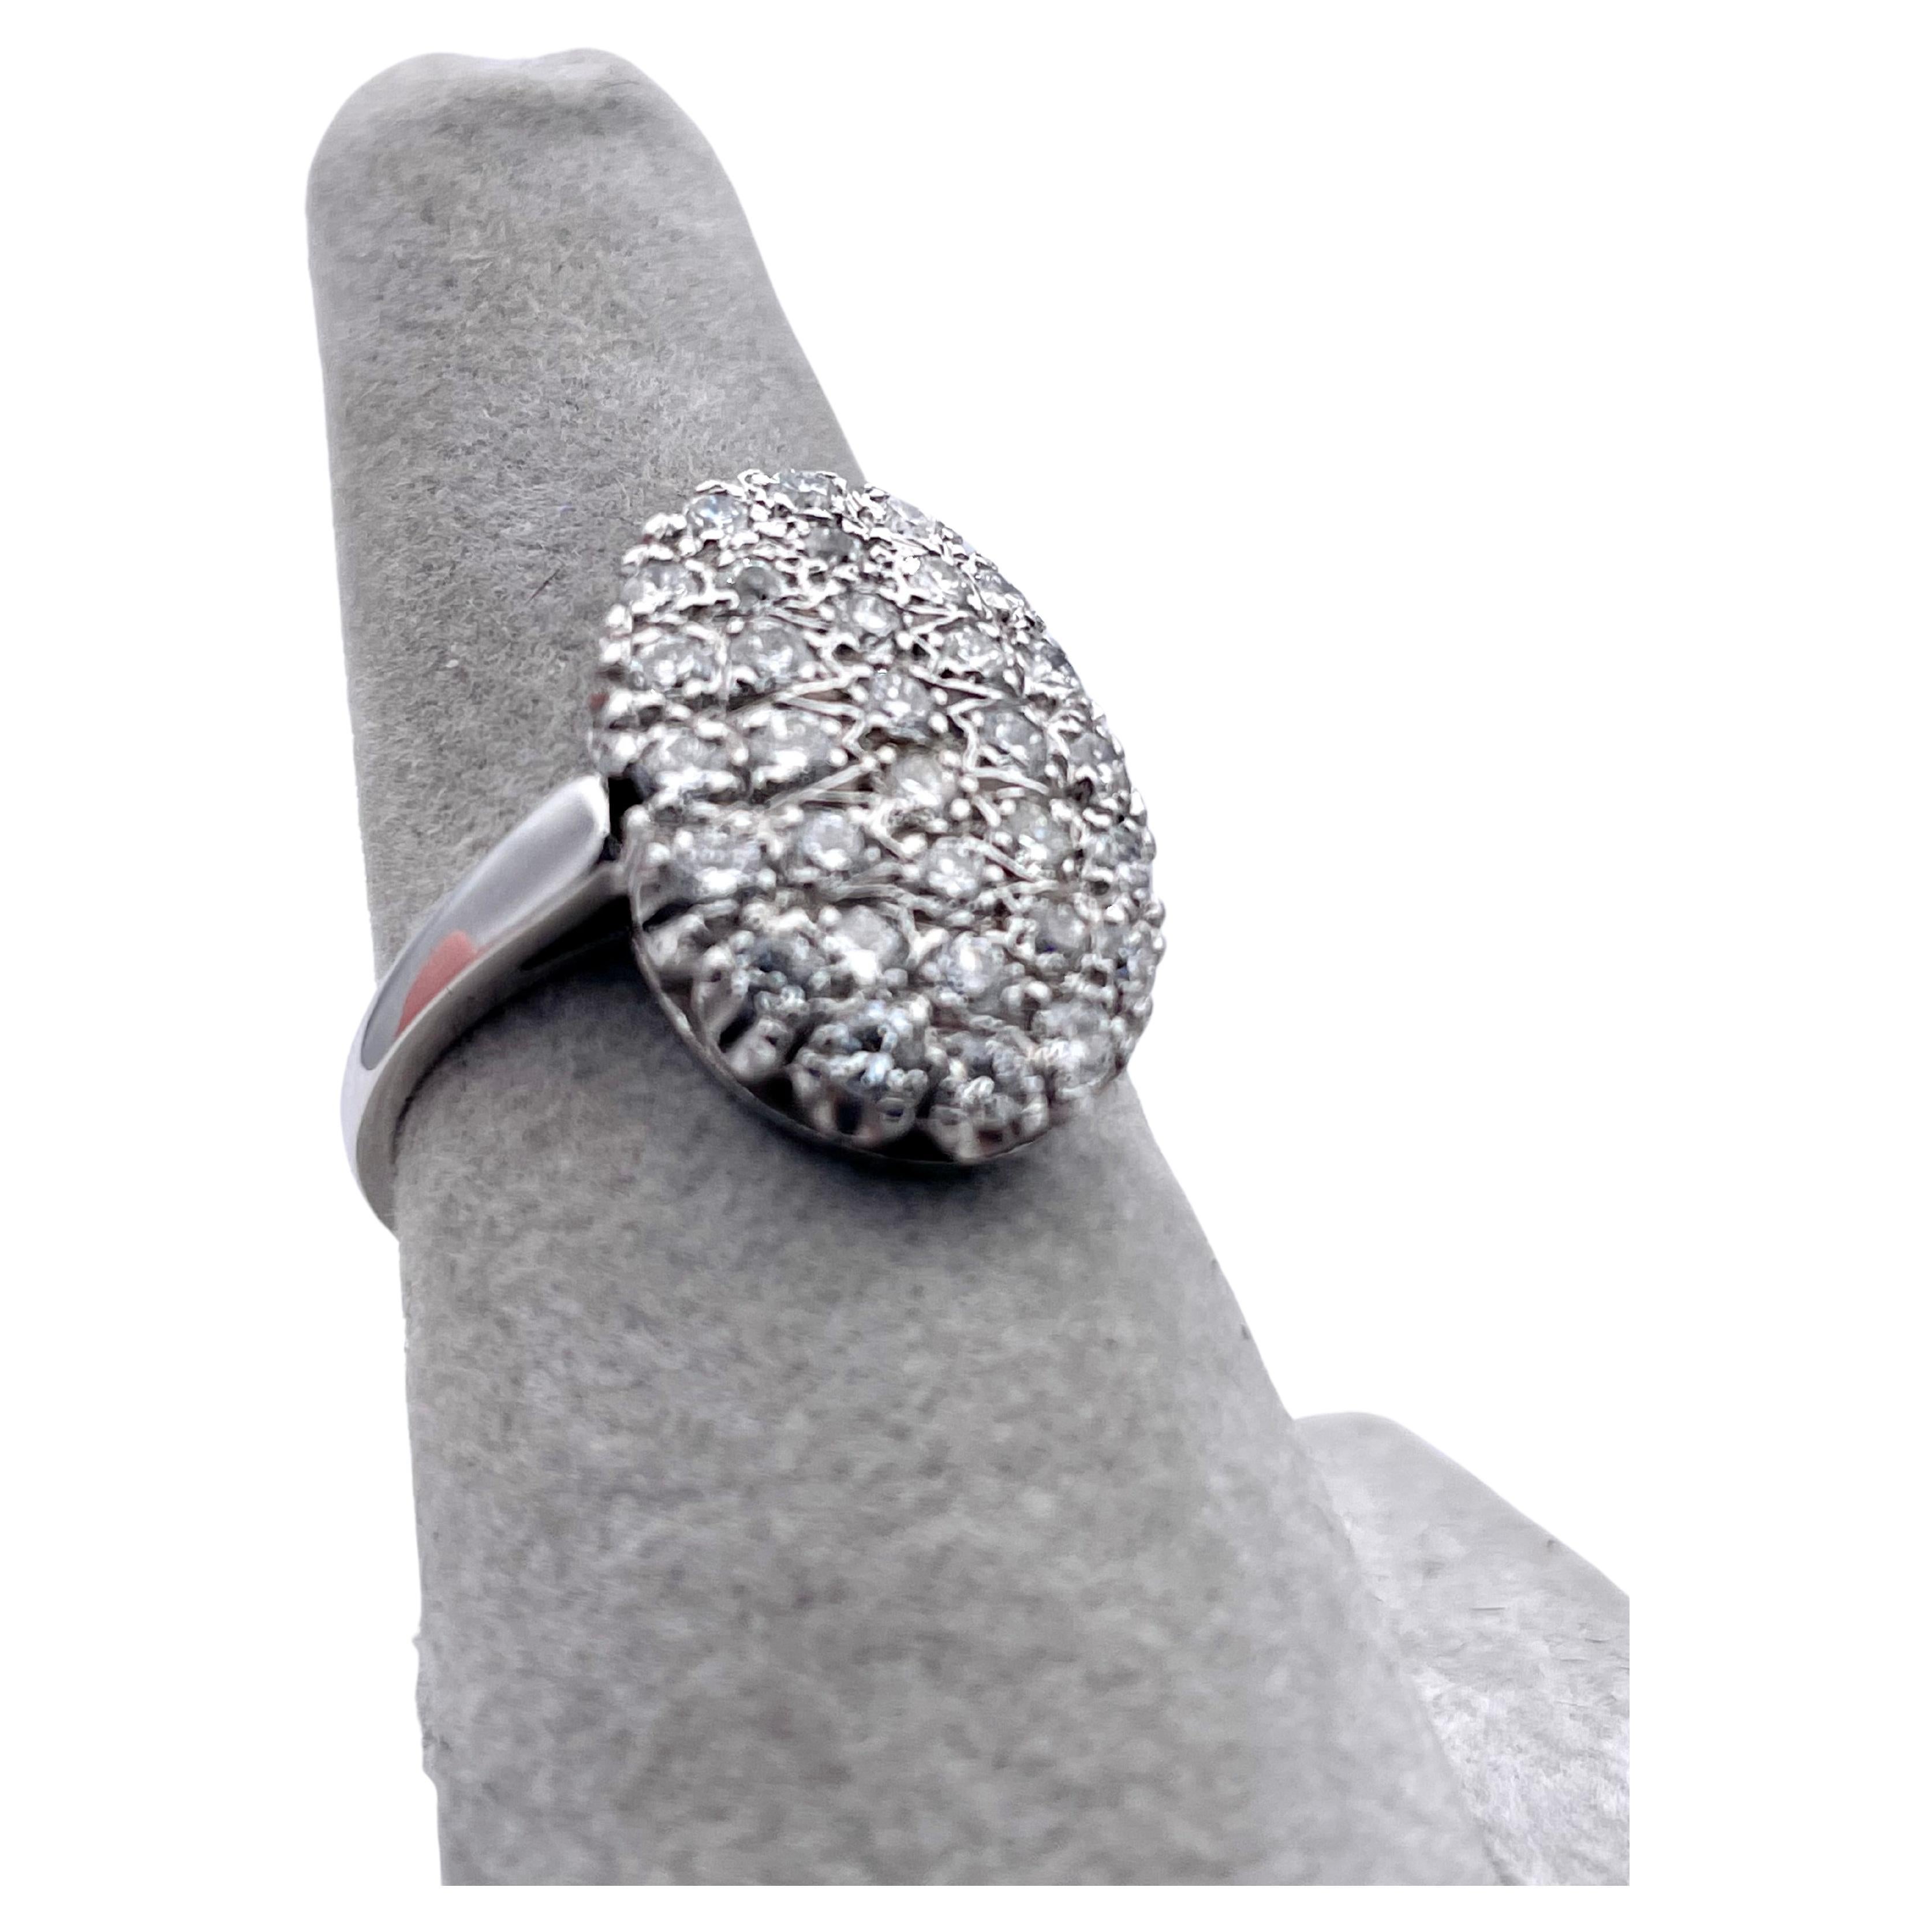 Large oval cocktail ring.  Well-matched and well-selected near colorless diamonds.  Round brilliant cut, weighting approximately 1.80 carats.  Set in 14K white gold. 3/4